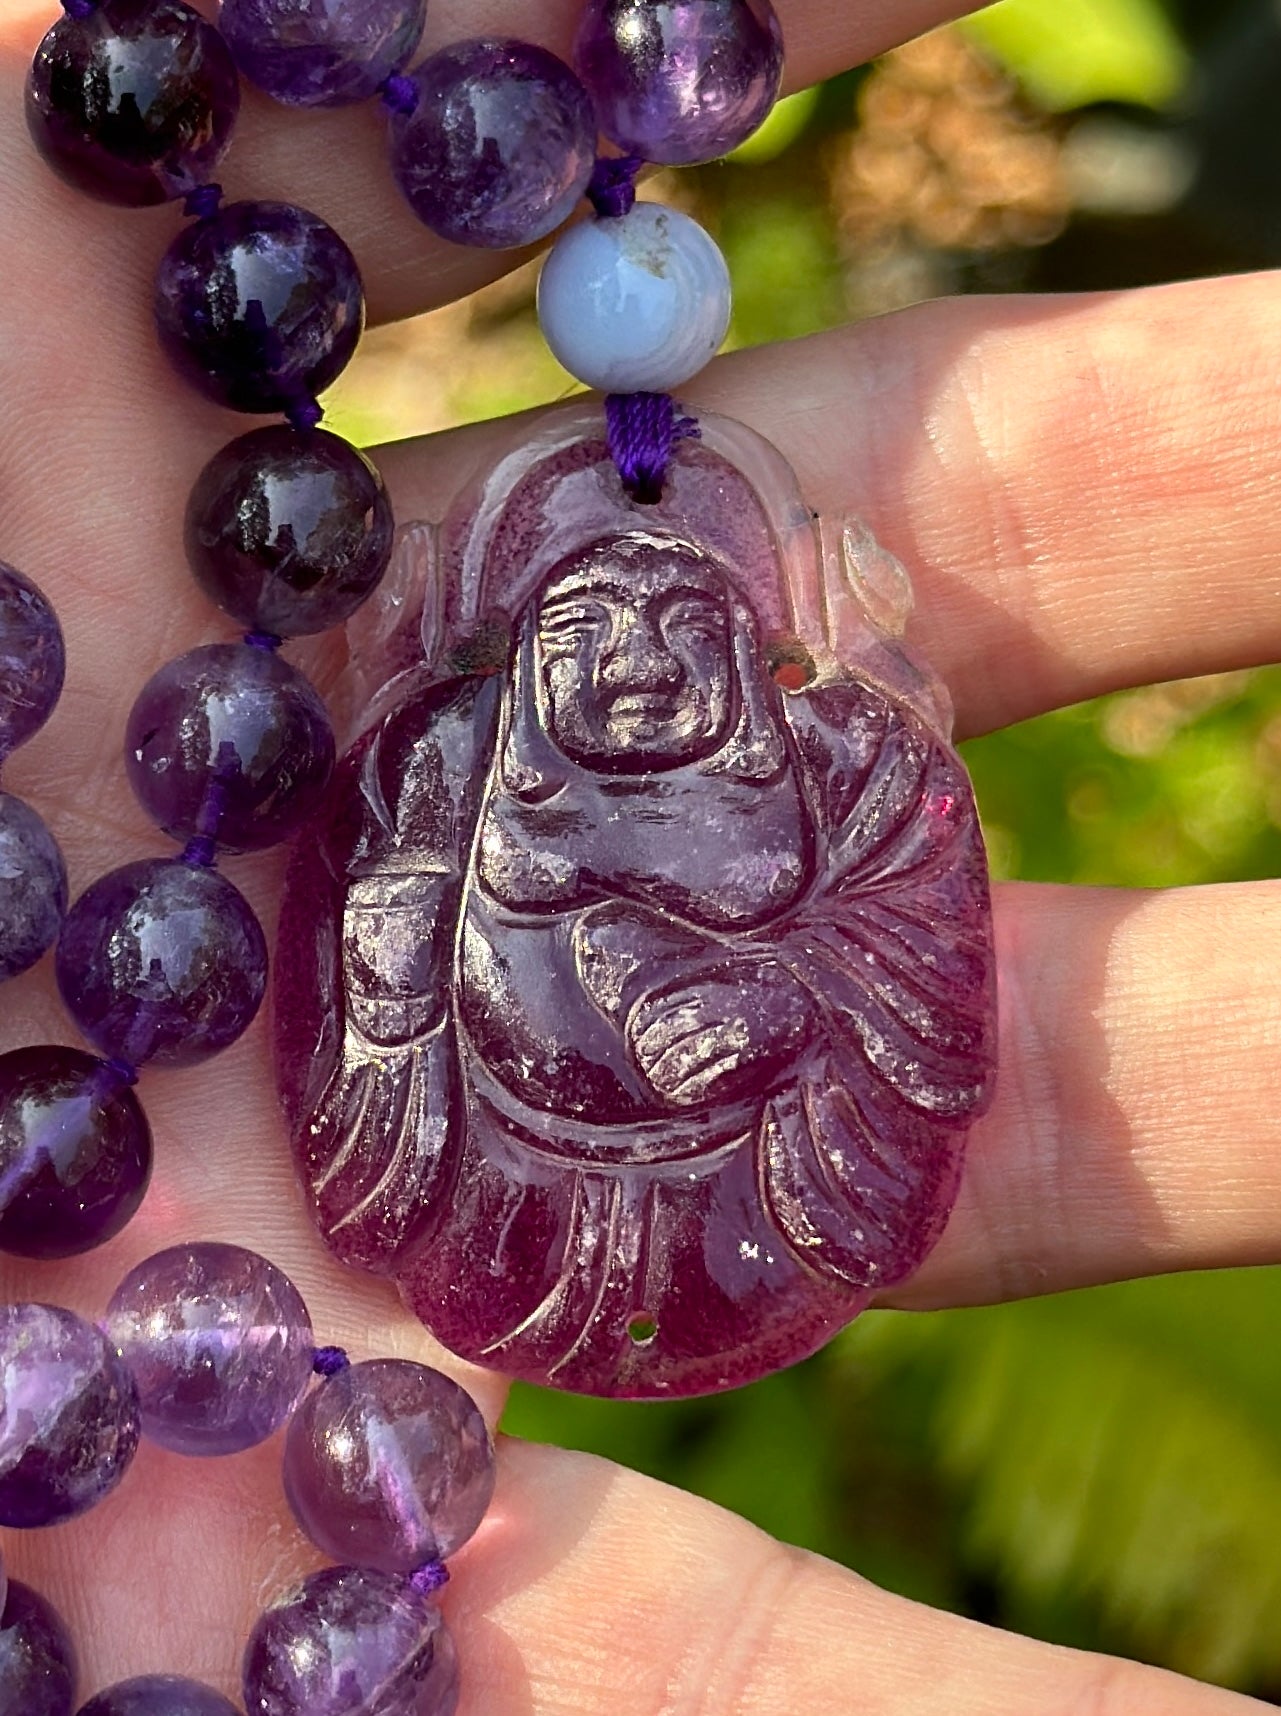 This is a wonderful antique carved Amethyst Smiling Fat Buddha Pendant on a magnificent necklace of natural Amethyst Beads of 27 inches in length. The Buddha is exquisitely carved in natural Amethyst.  The Buddha with his radiant smile and Fat